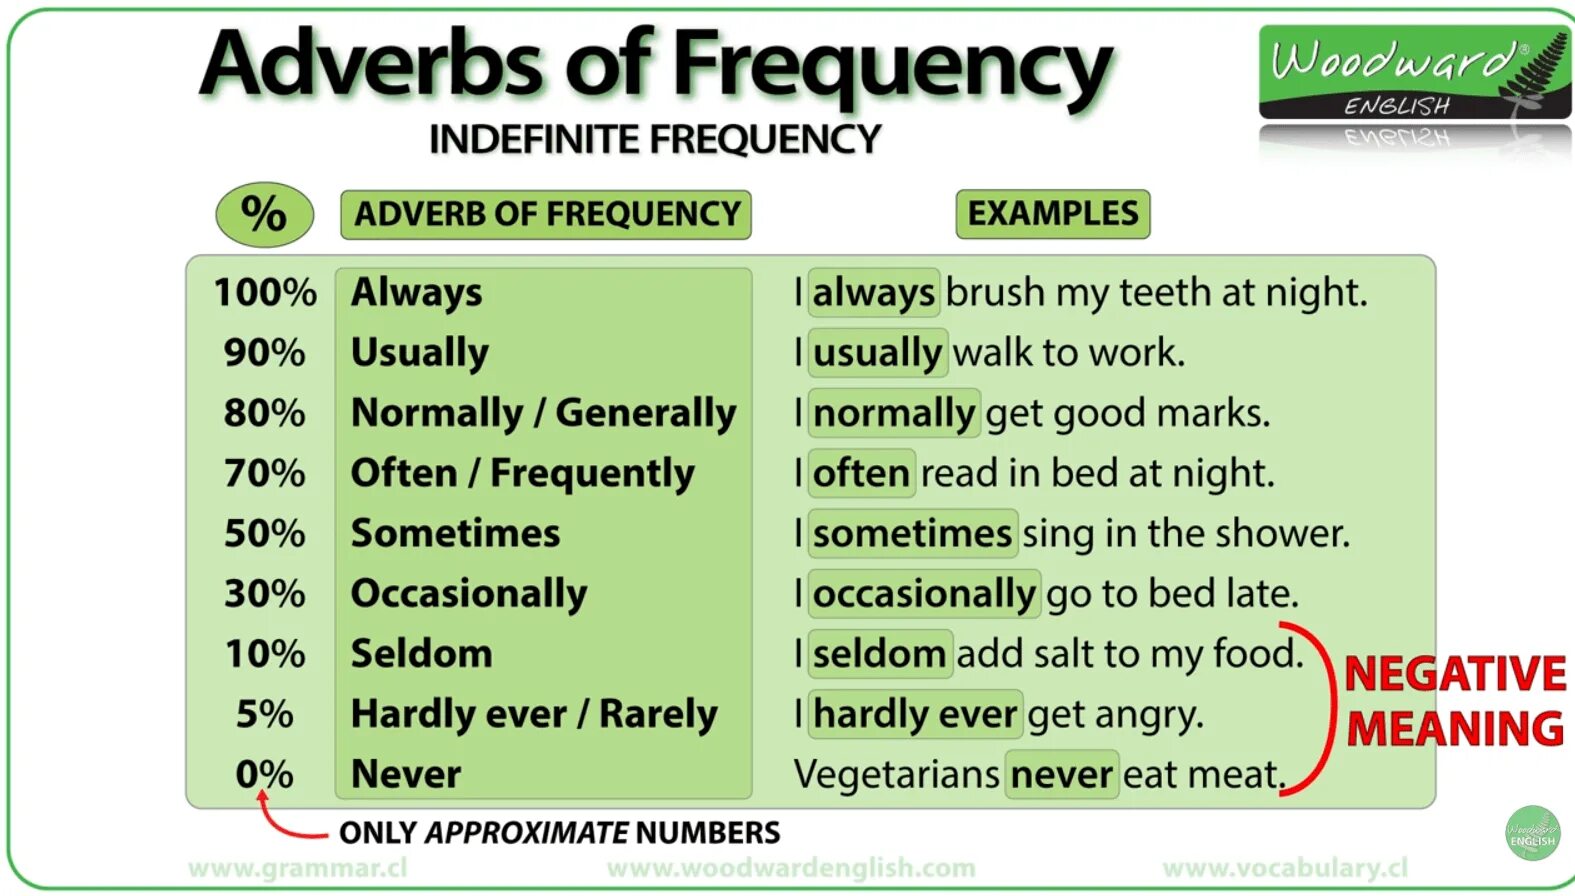 Adverbs of Frequency. Adverbs of Frequency in English. Adverbs and expressions of Frequency правило. Frequency adverbs грамматика. Always по английски